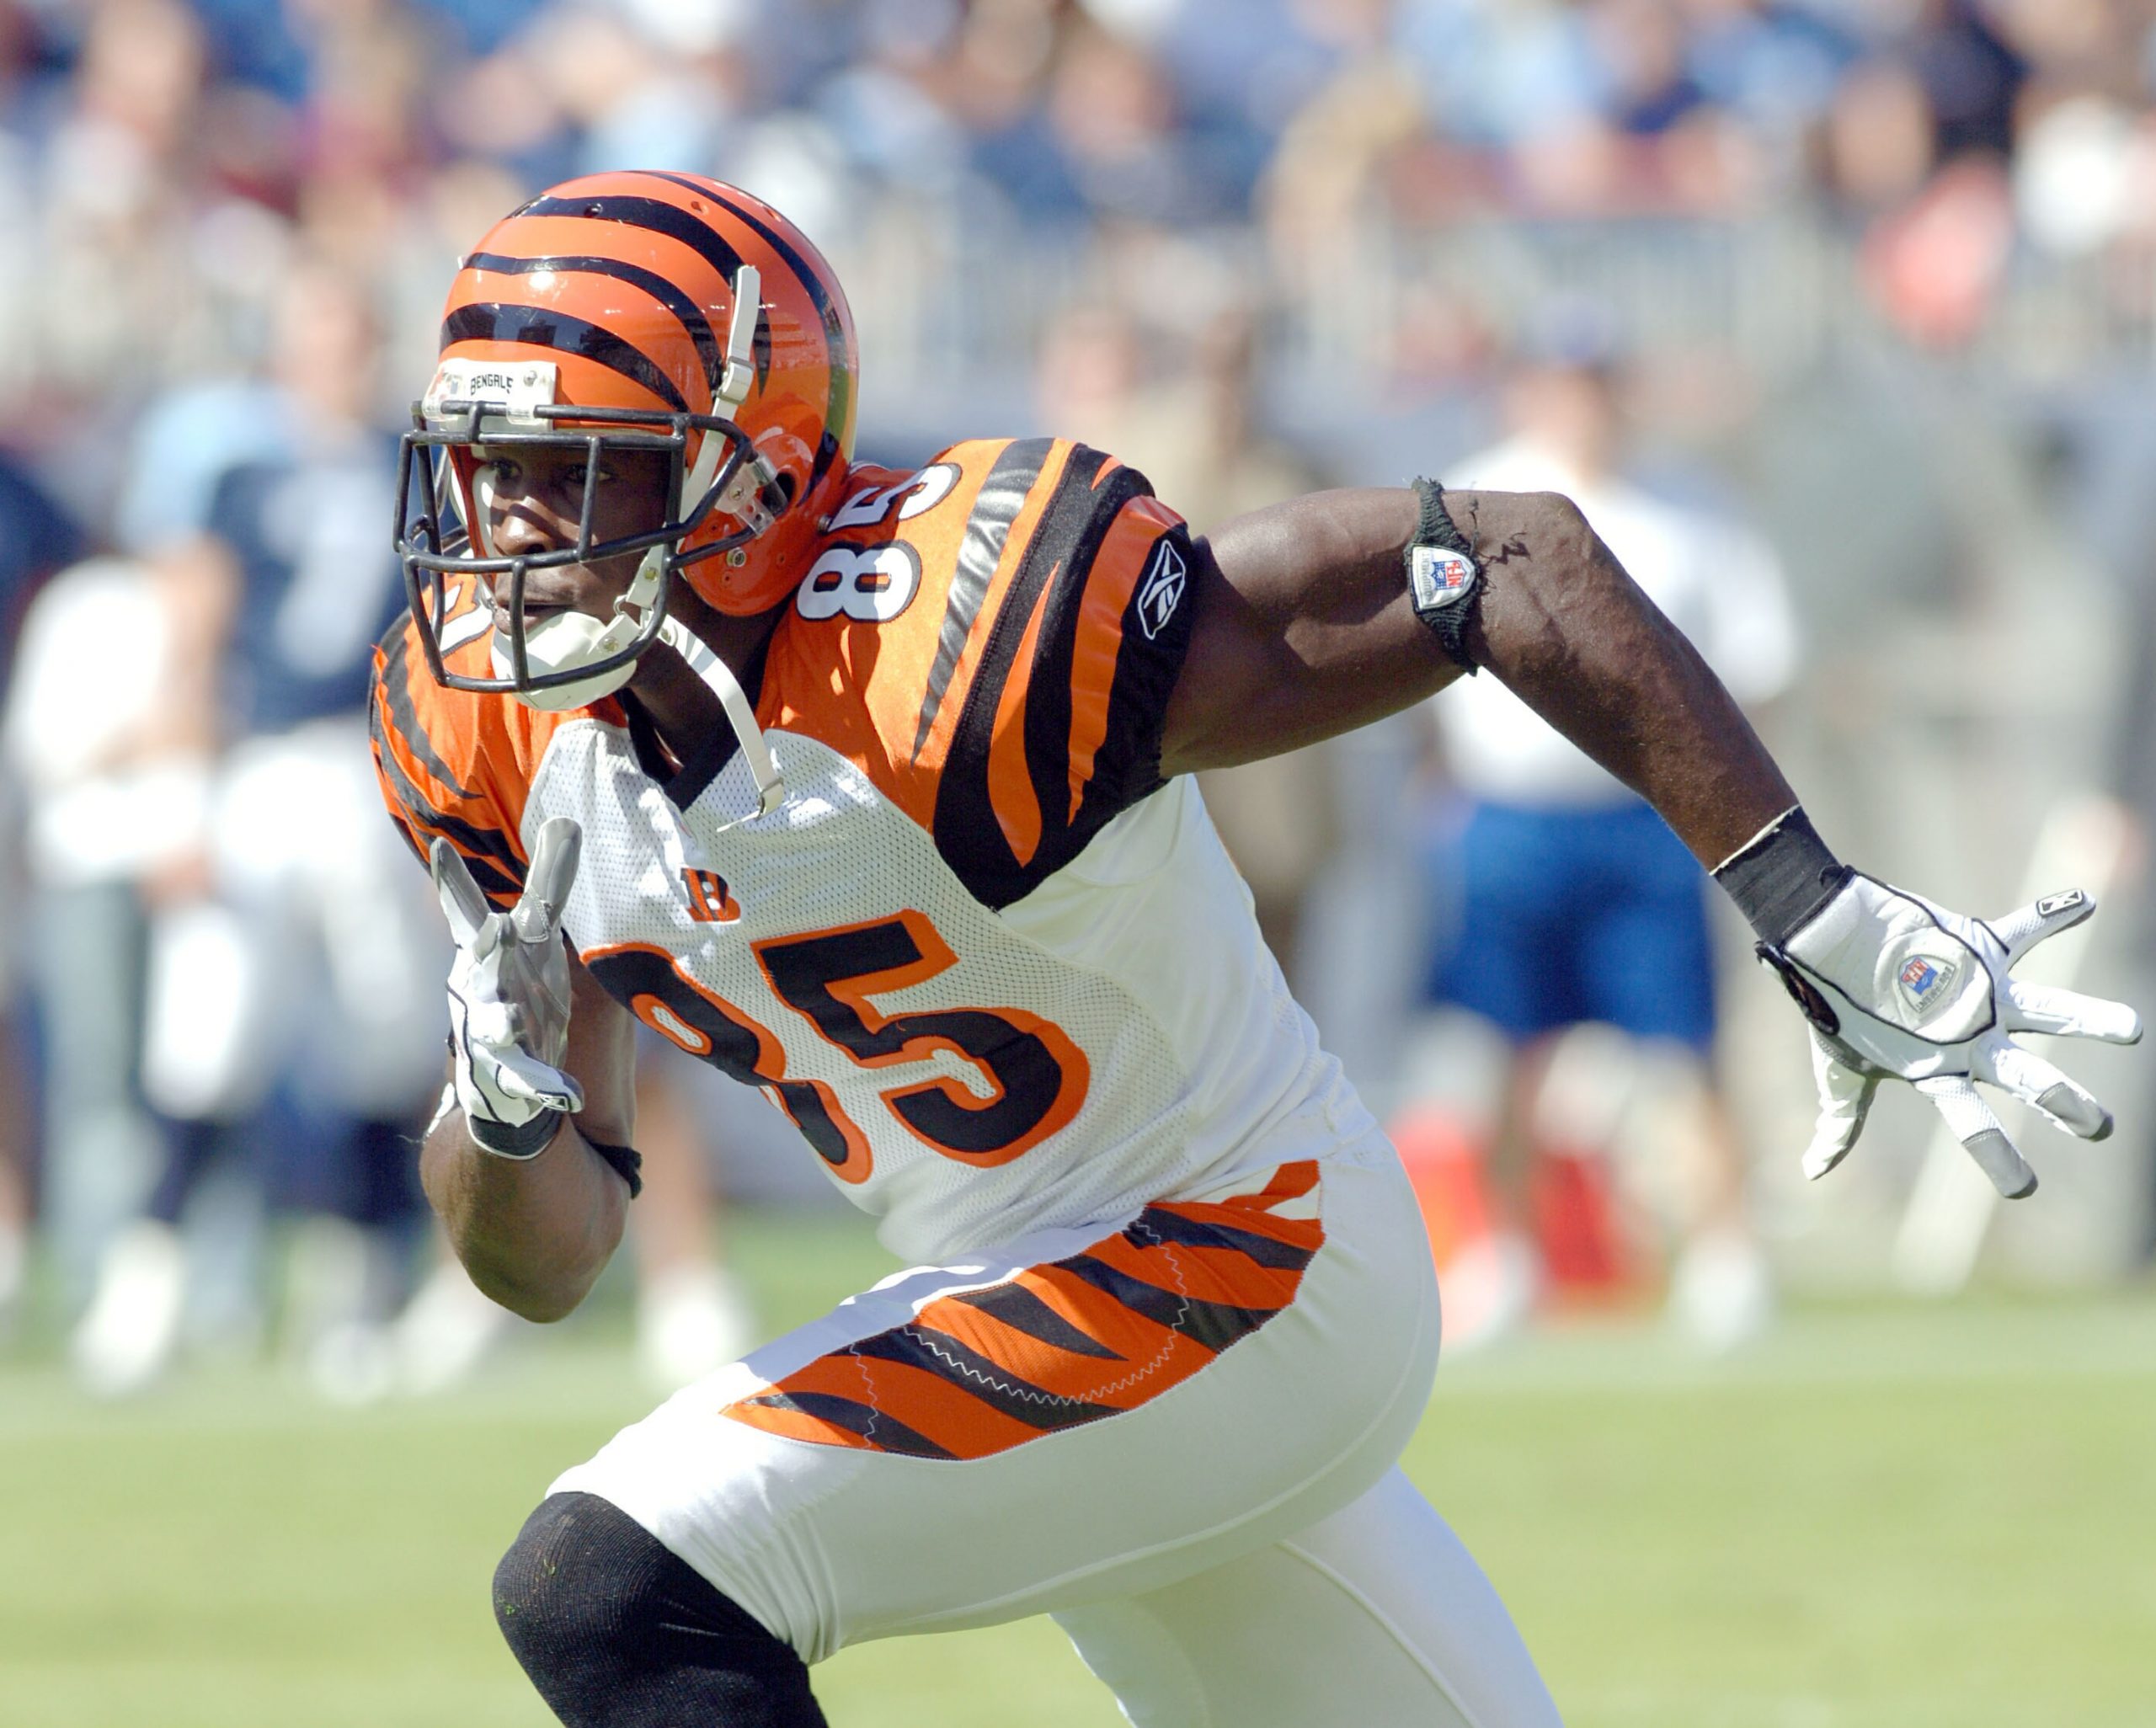 Chad Johnson breaks from the line of scrimmage during his playing days with the Cincinnati Bengals.